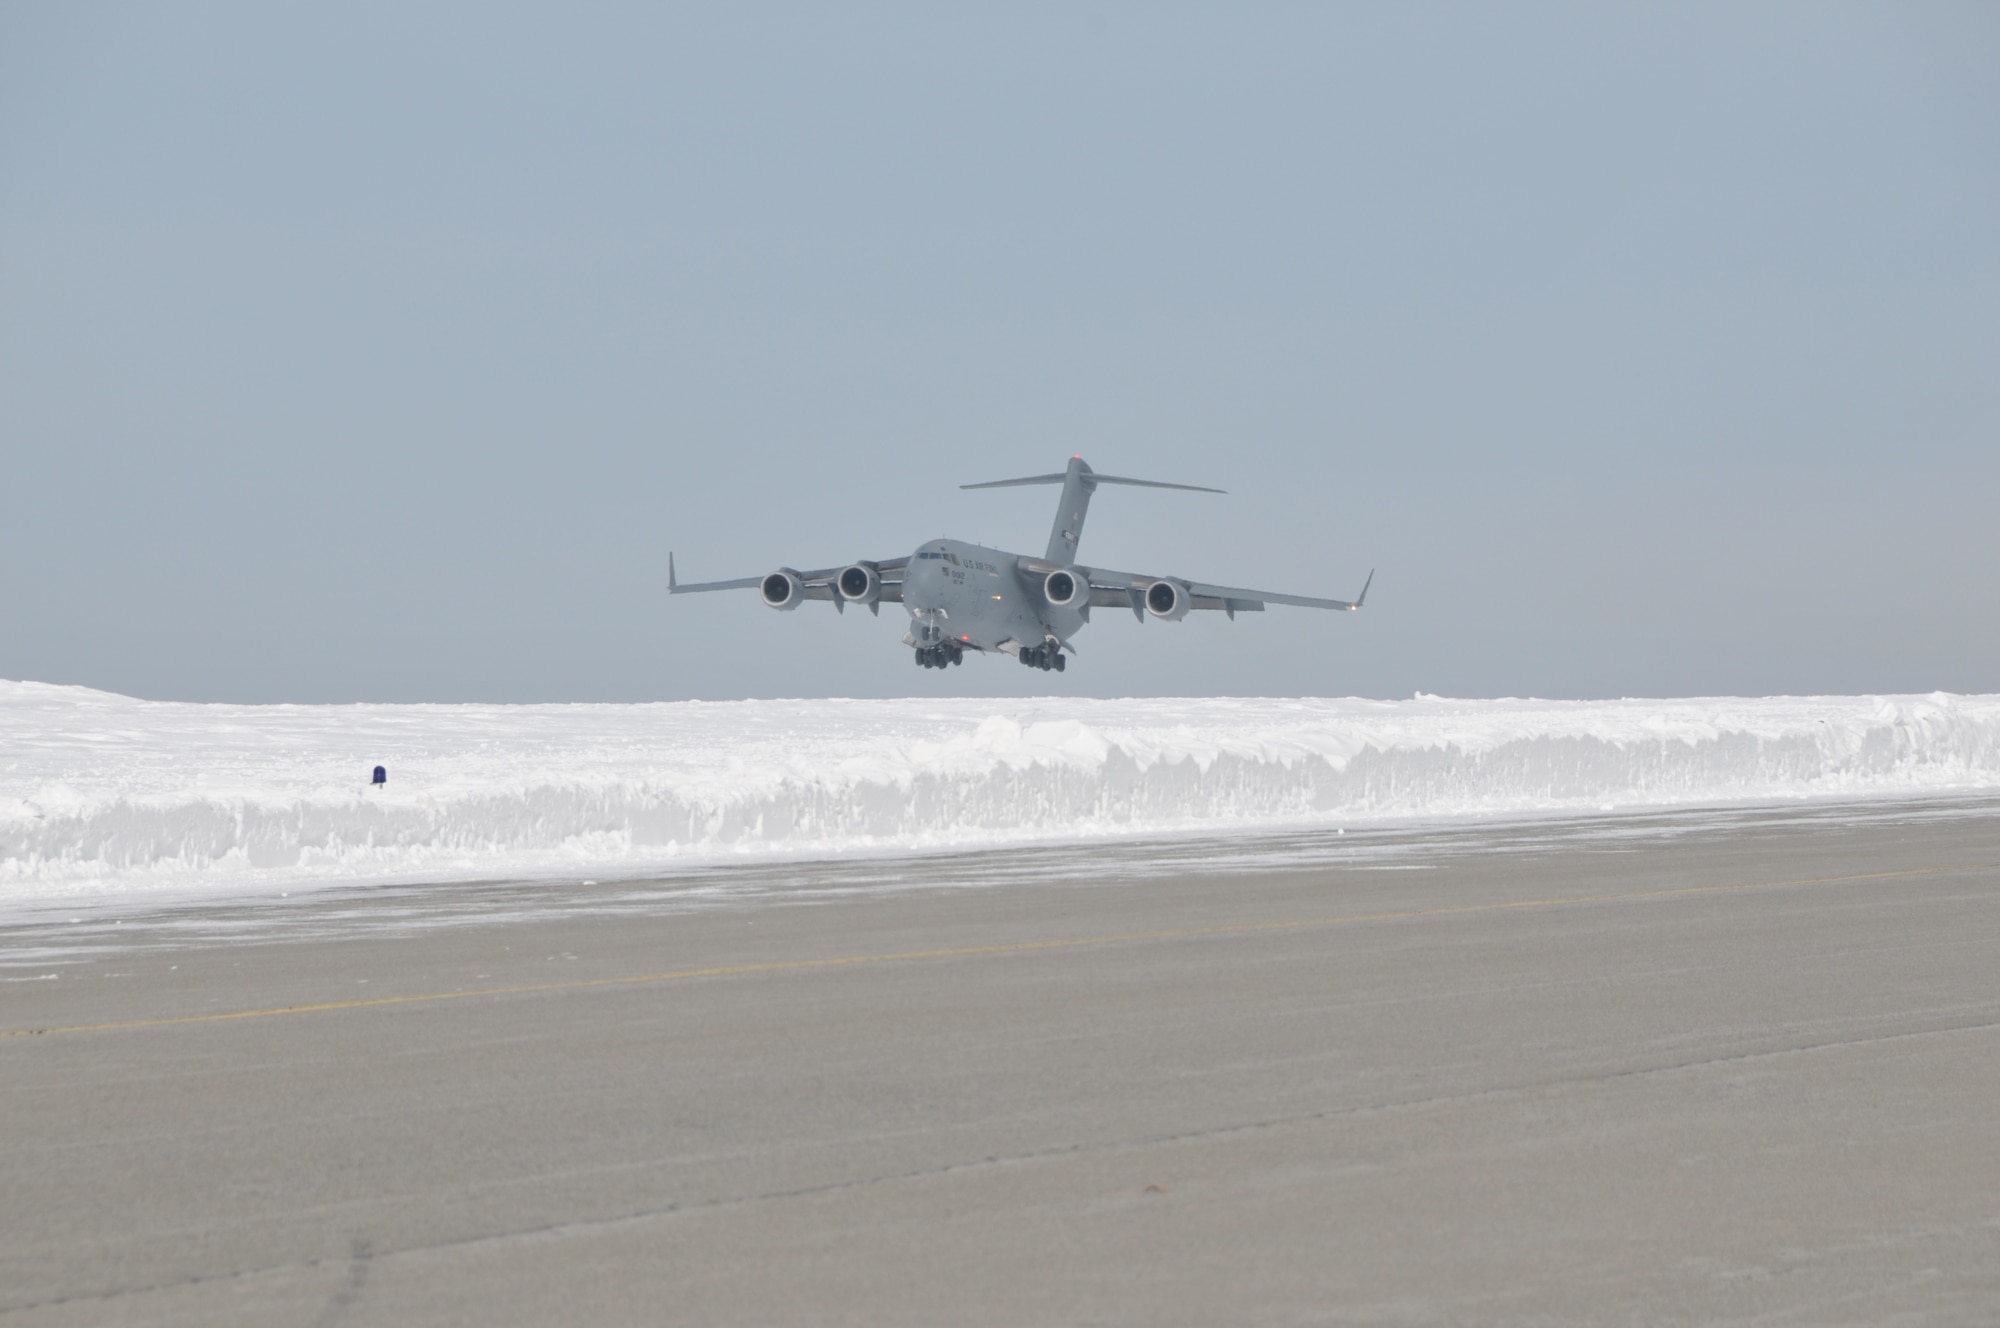 A C-17 Globemaster III from Stewart Air National Guard Base brought about 30 Airmen home to Stratton Air National Guard Base, Scotia, New York, on Feb. 24, 2015. The Airmen were in Antarctica supporting Operation Deep Freeze. More Airmen and LC-130 Hercules ski-equipped aircraft assigned to the 109th Airlift Wing will return throughout the week following the close of the wing's 27th year supporting the National Science Foundation. The season began in October. (U.S. Air National Guard photo by Master Sgt. William Gizara/Released)